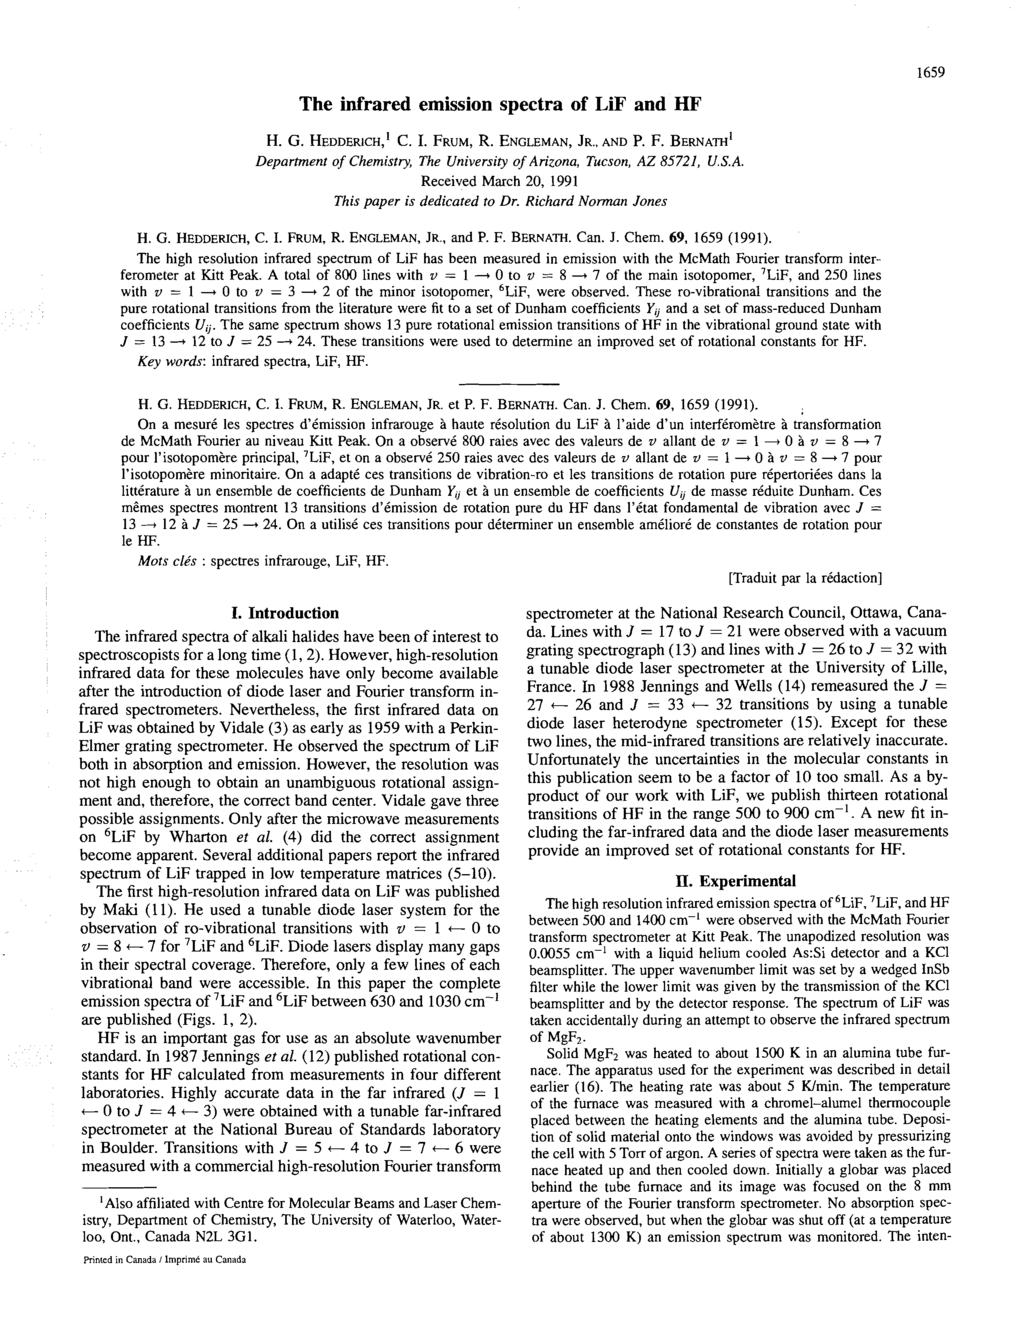 The infrared emission spectra of LiF and HF H. G. HEDDERICH,' C. I. FRUM, R. ENGLEMAN, JR., AND P. F. BERNATH' Department of Chemistry, The University of Arizona, Tucson, AZ 85721, U.S.A. Received March 20, 1991 This paper is dedicated to Dr.